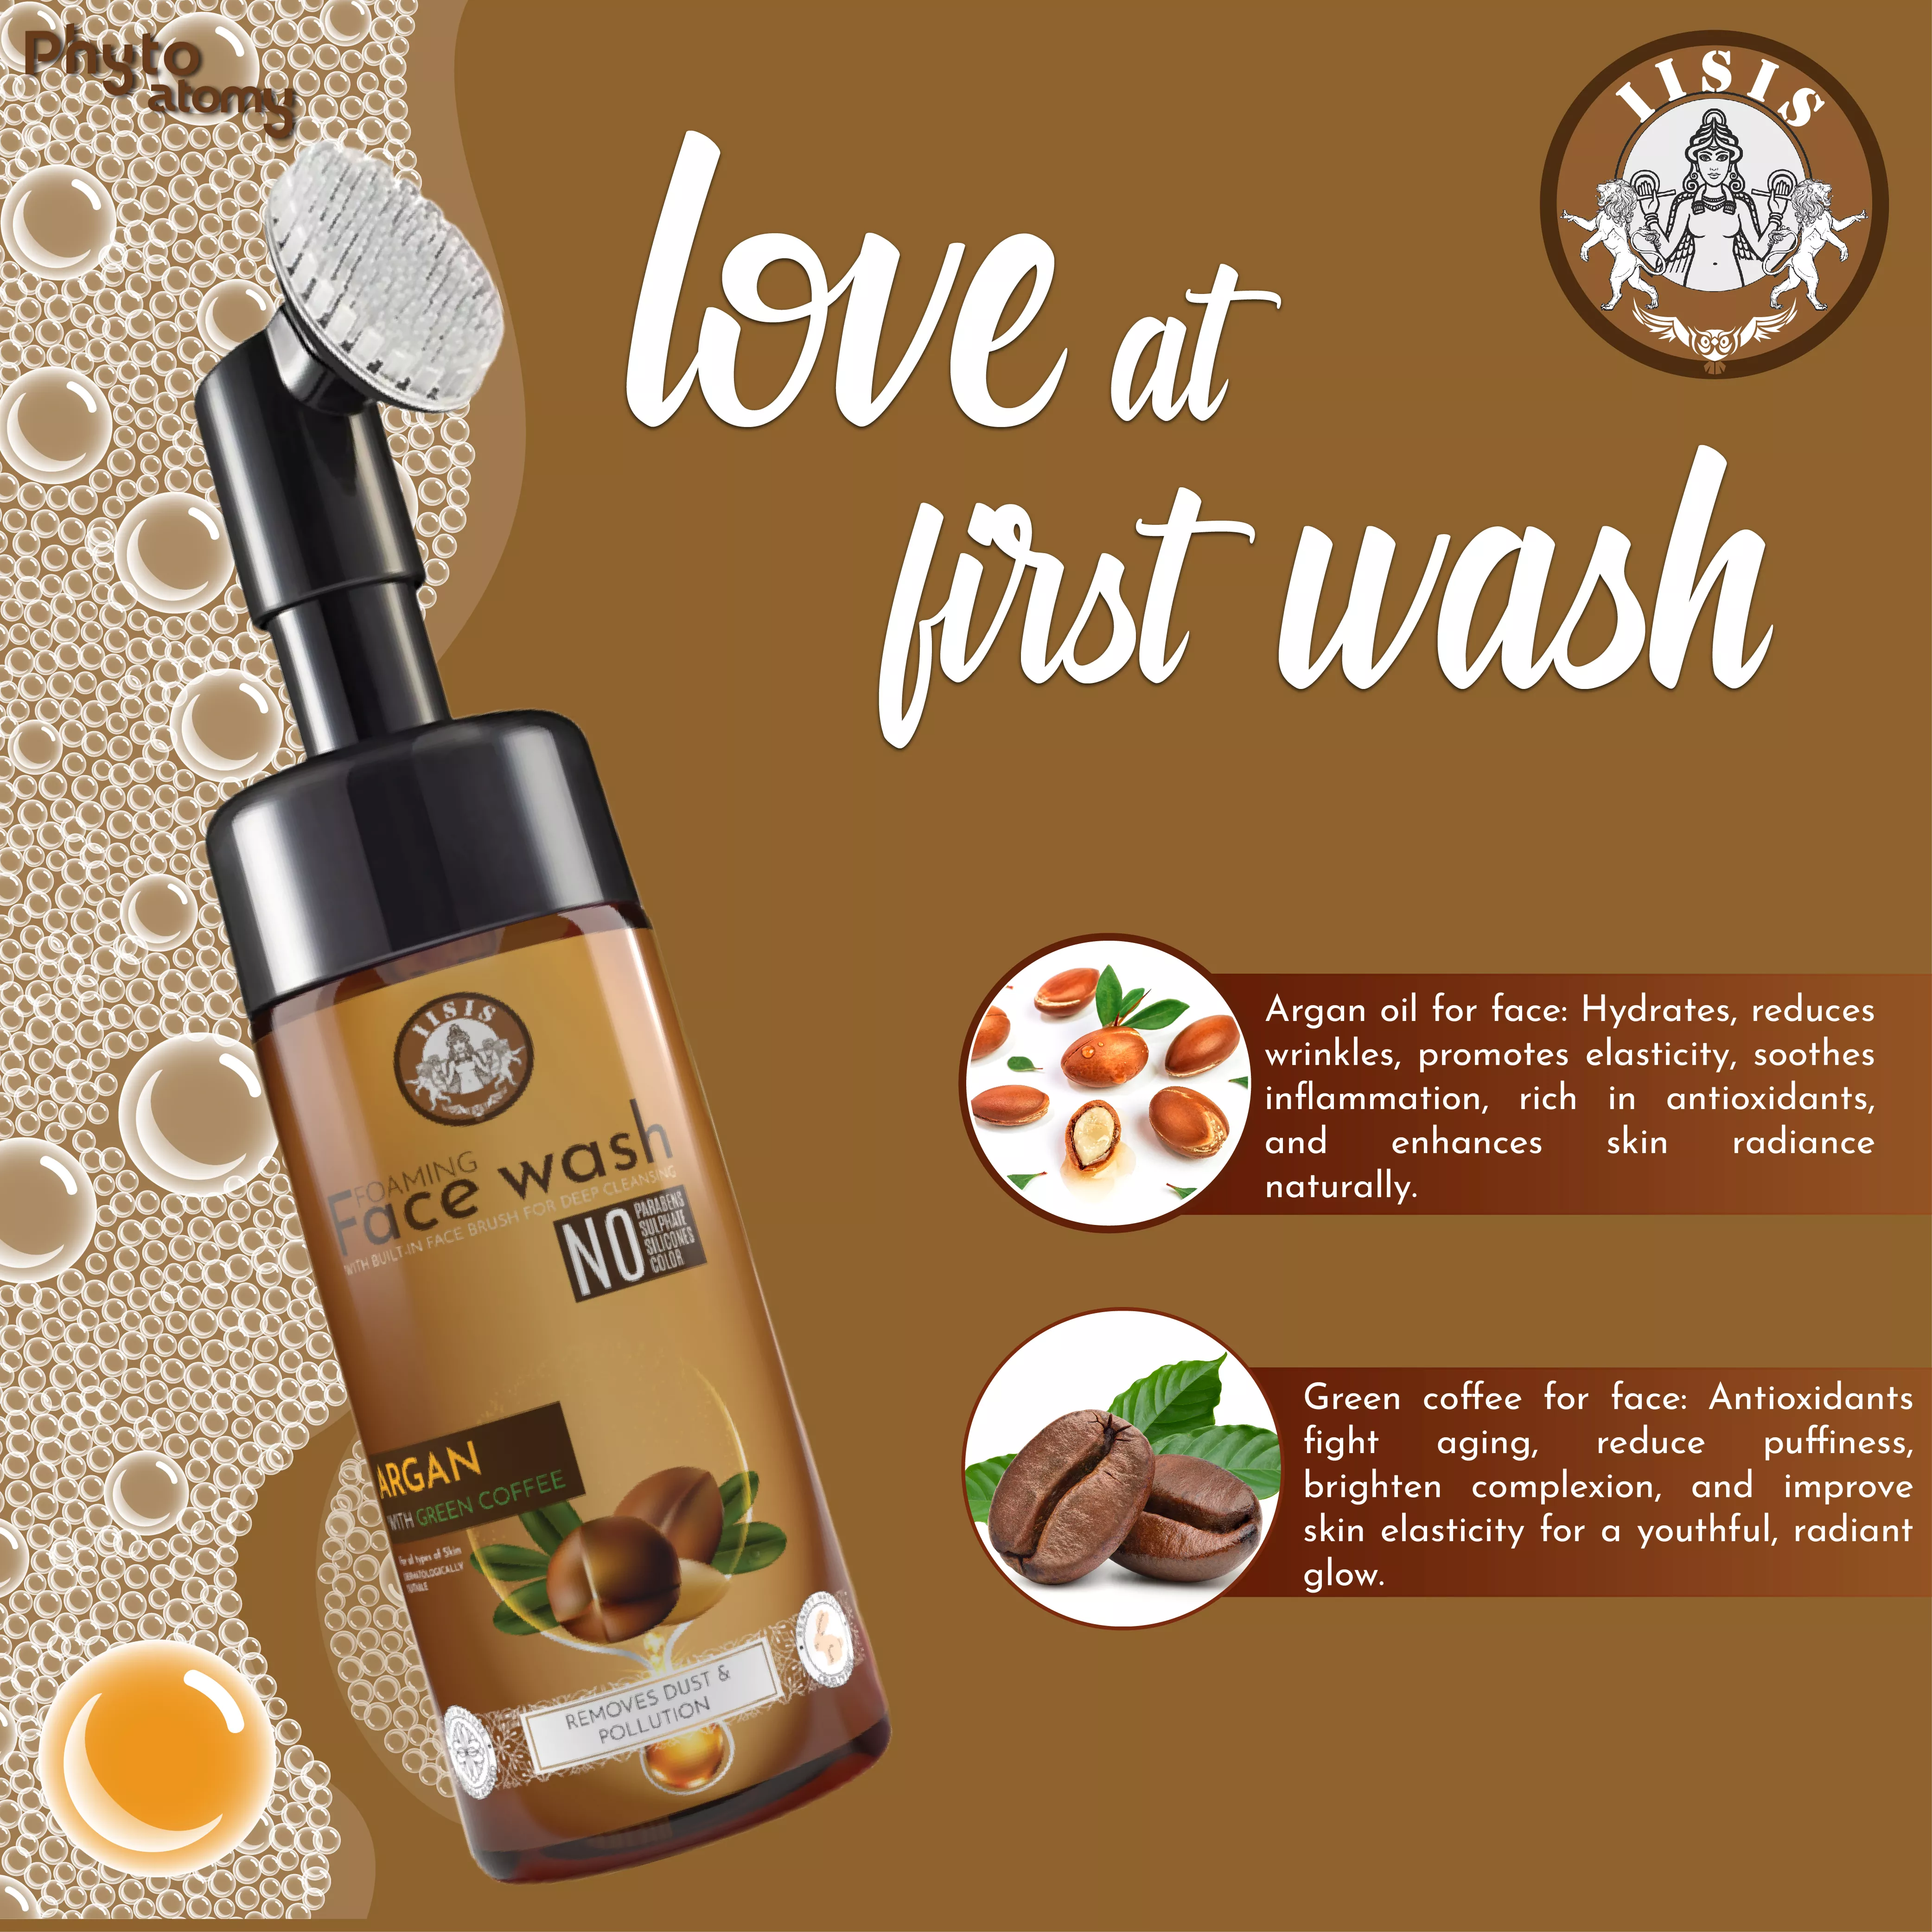 Argan With Green Coffee Foaming Face Wash With Built-In Face Brush (150ml)